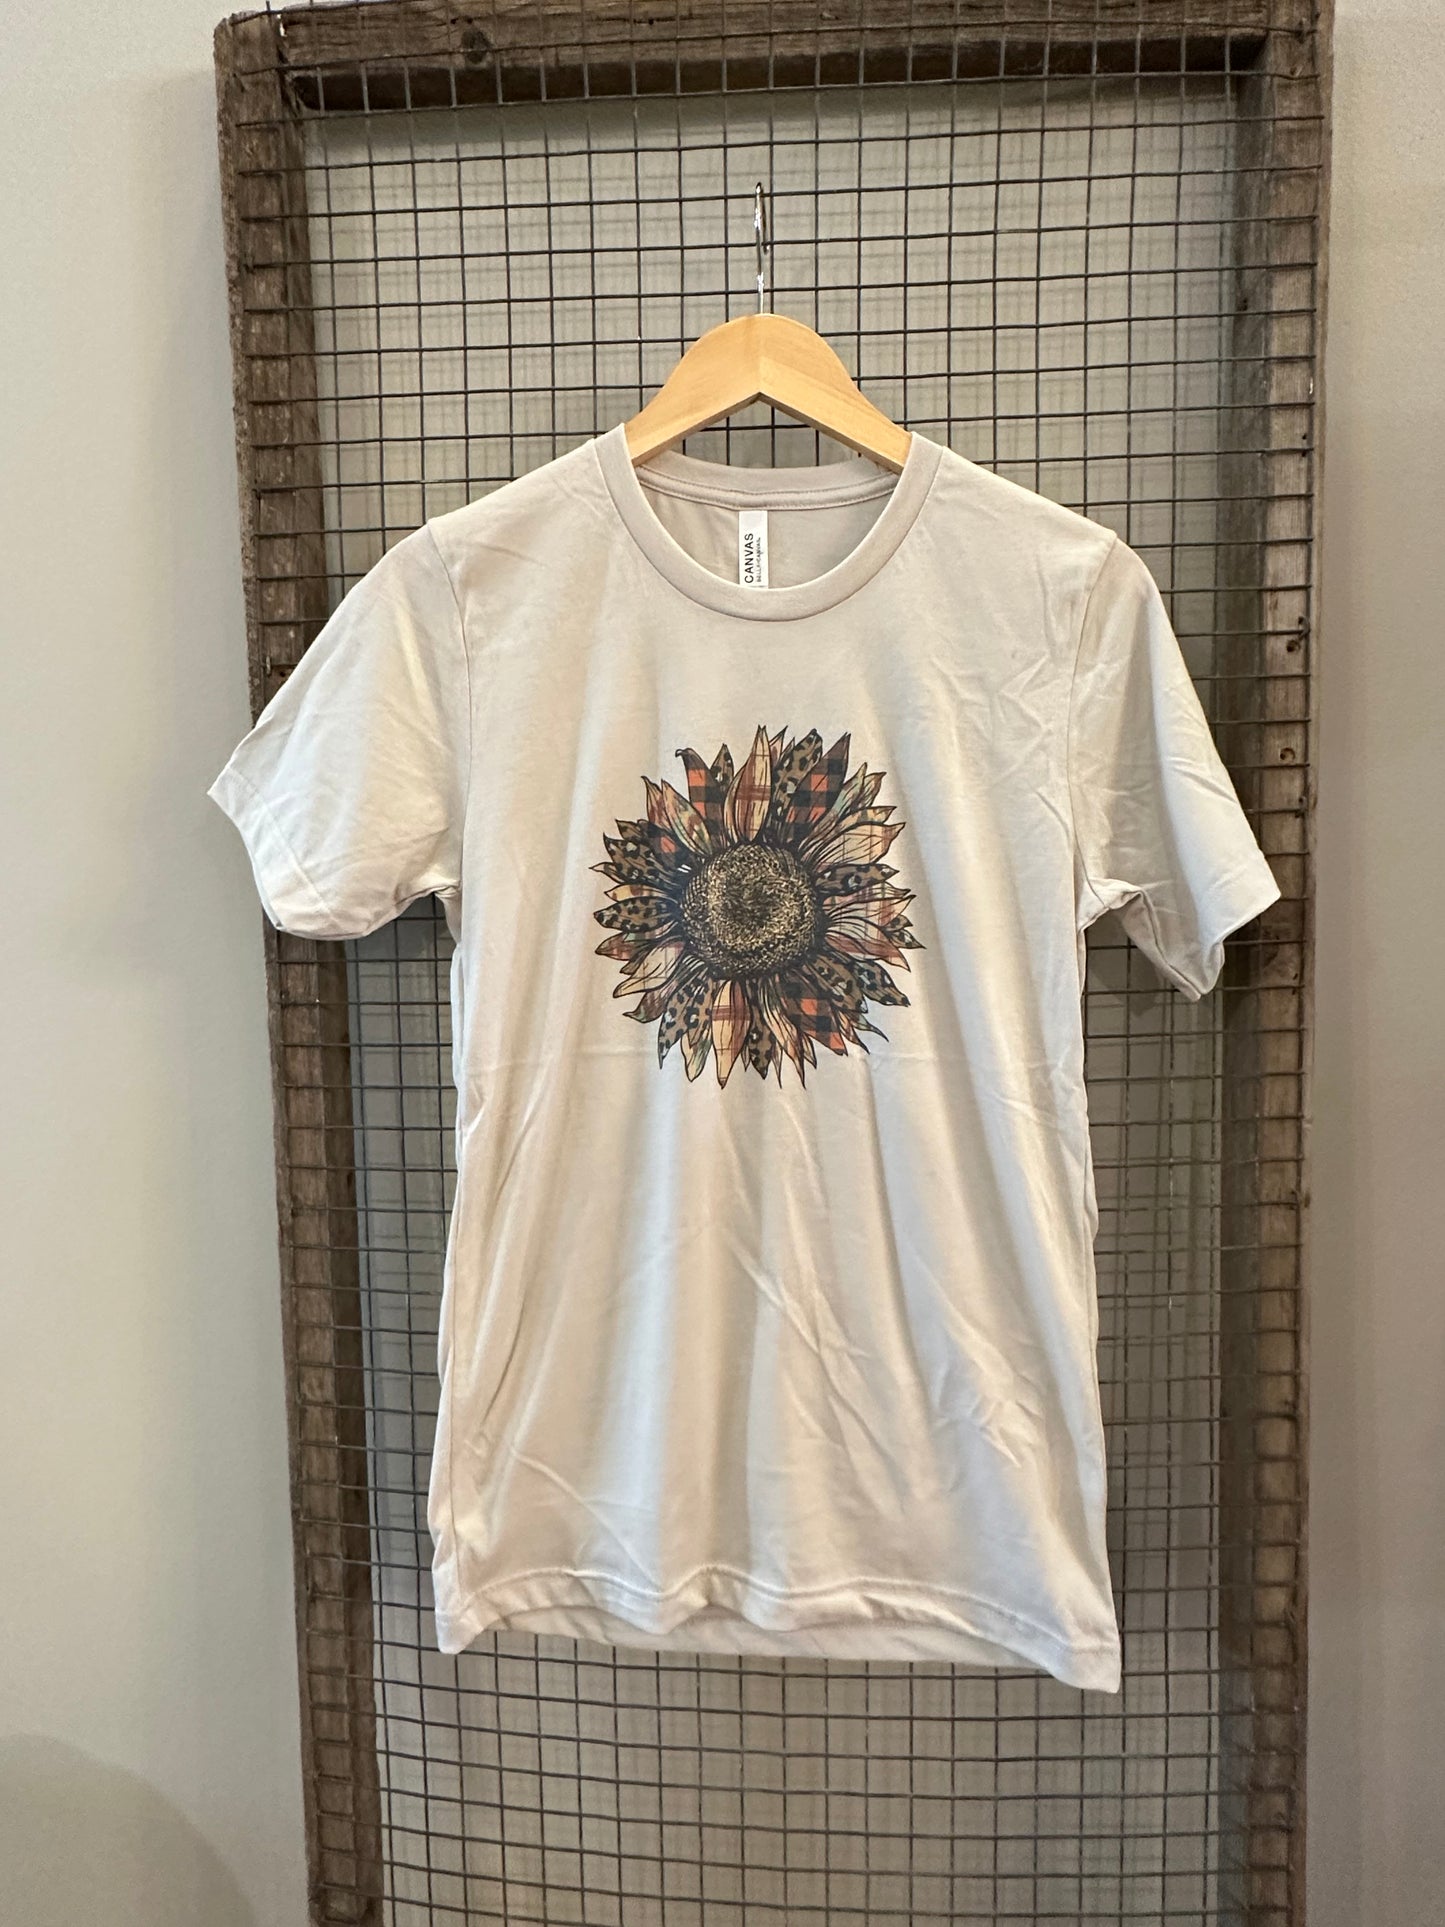 Patterned Sunflower Tee